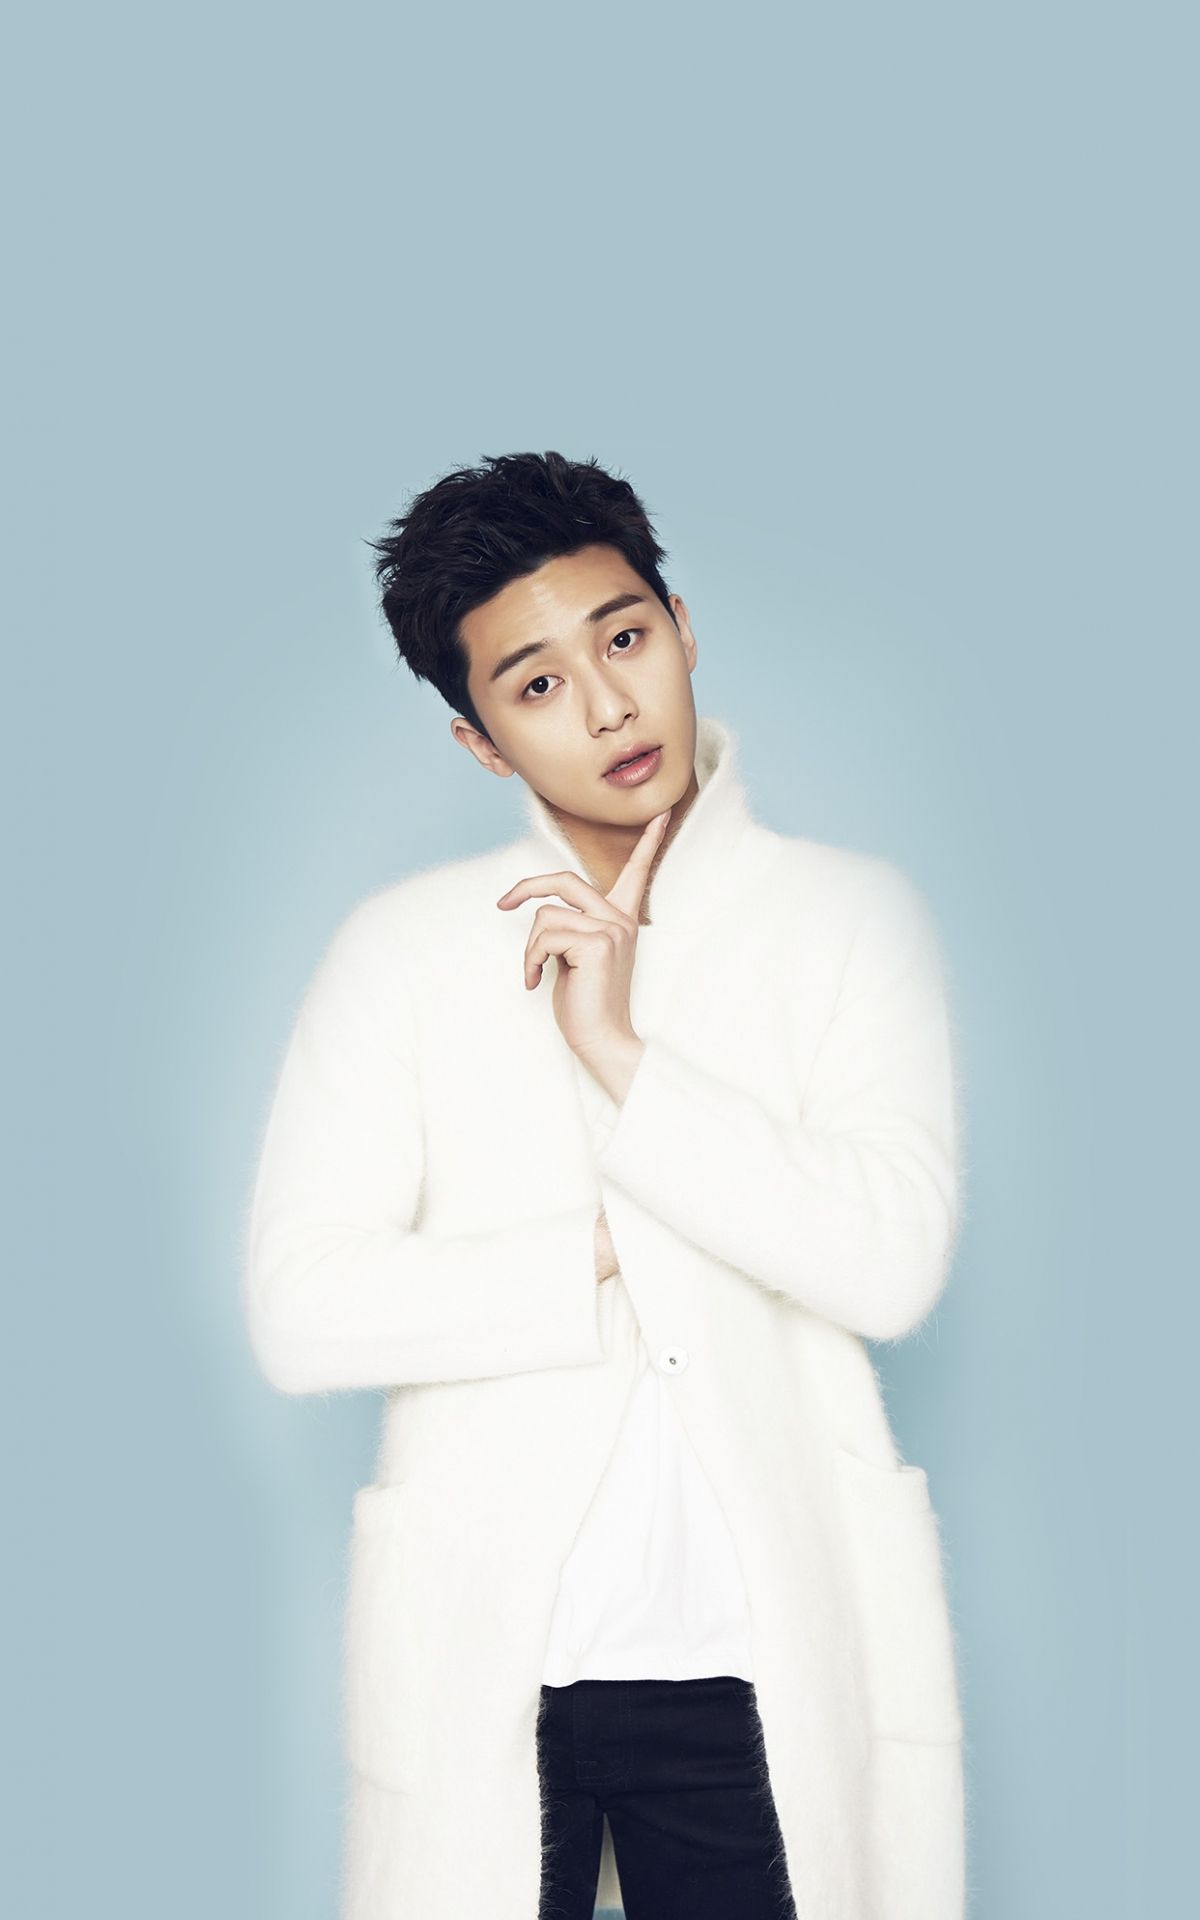 Free Download Park Seo Joon Kpop Blue Handsome Cool Guy Android Wallpaper [1242x2208] For Your Desktop, Mobile & Tablet. Explore Park Seo Joon Wallpaper. Park Seo Joon Wallpaper, Seo Soojin Wallpaper